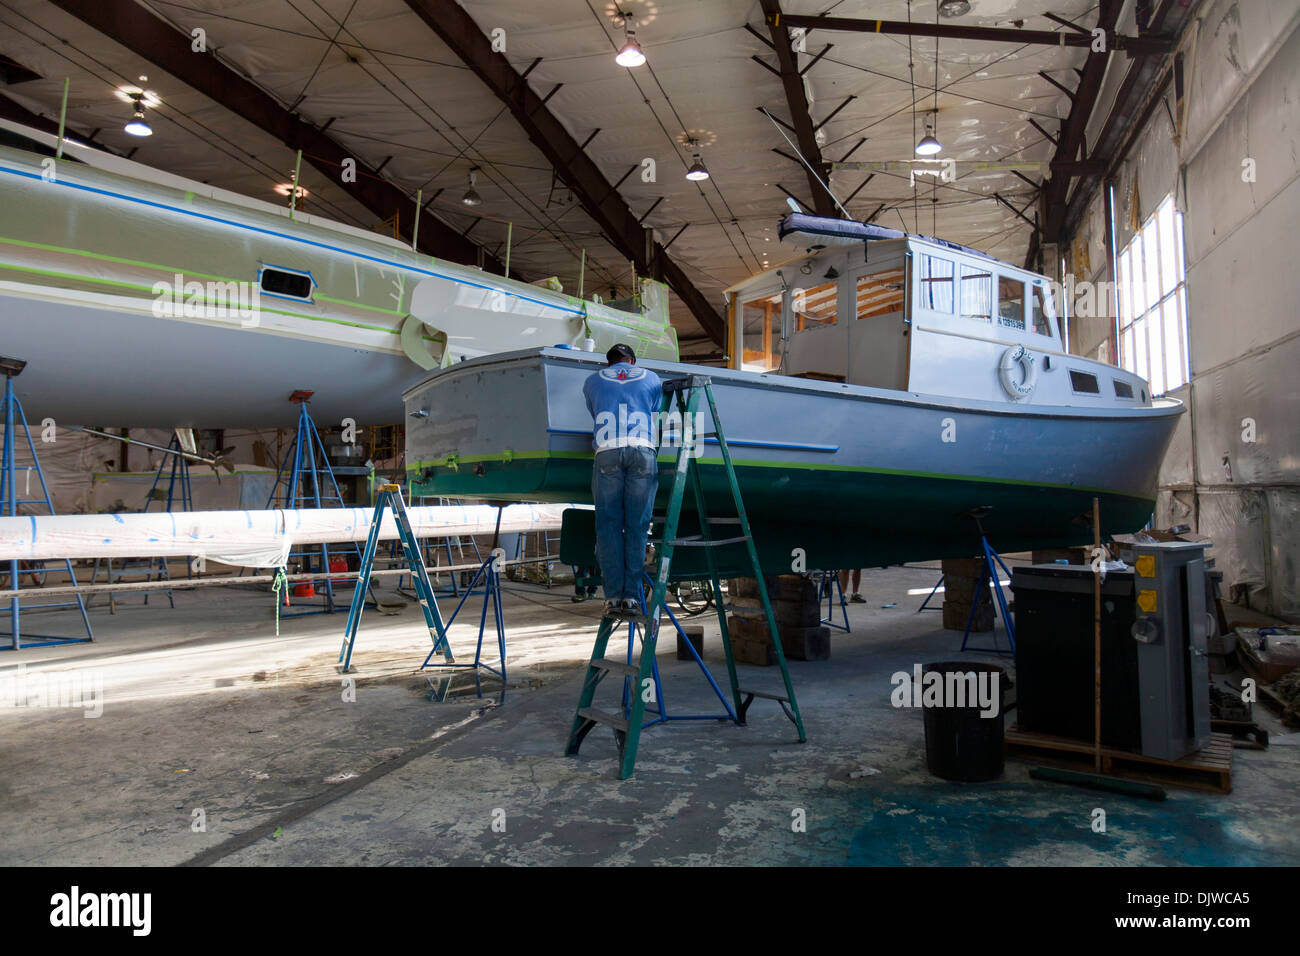 A painter works of a wooden lobster boat while standing on a ladder in a large work shed at Newport Shipyard in Rhode Island Stock Photo